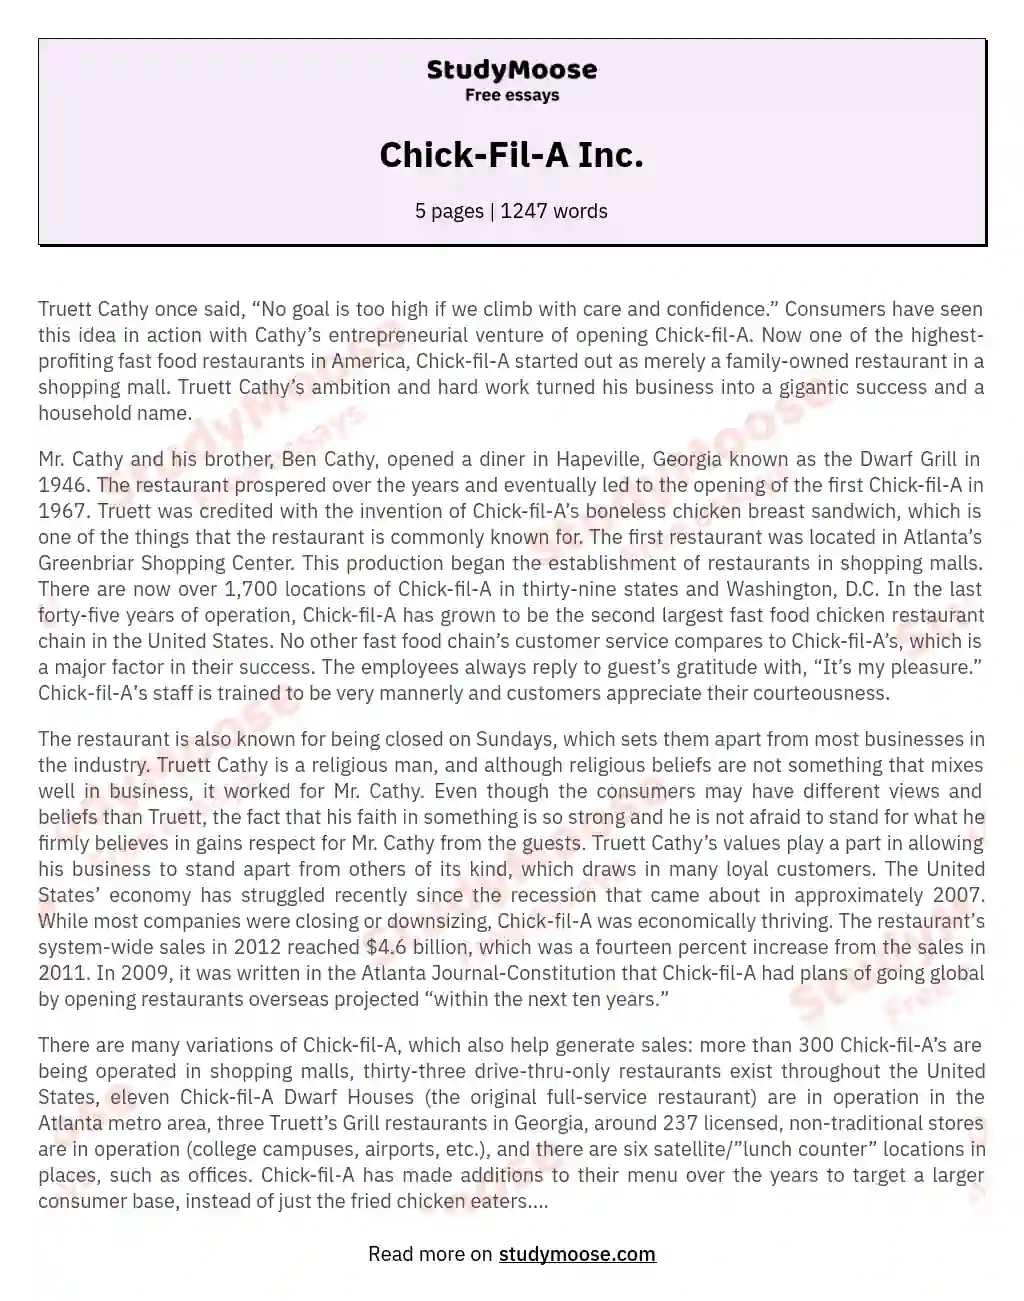 Success Story of Chick-fil-A: A Legacy Built on Values essay